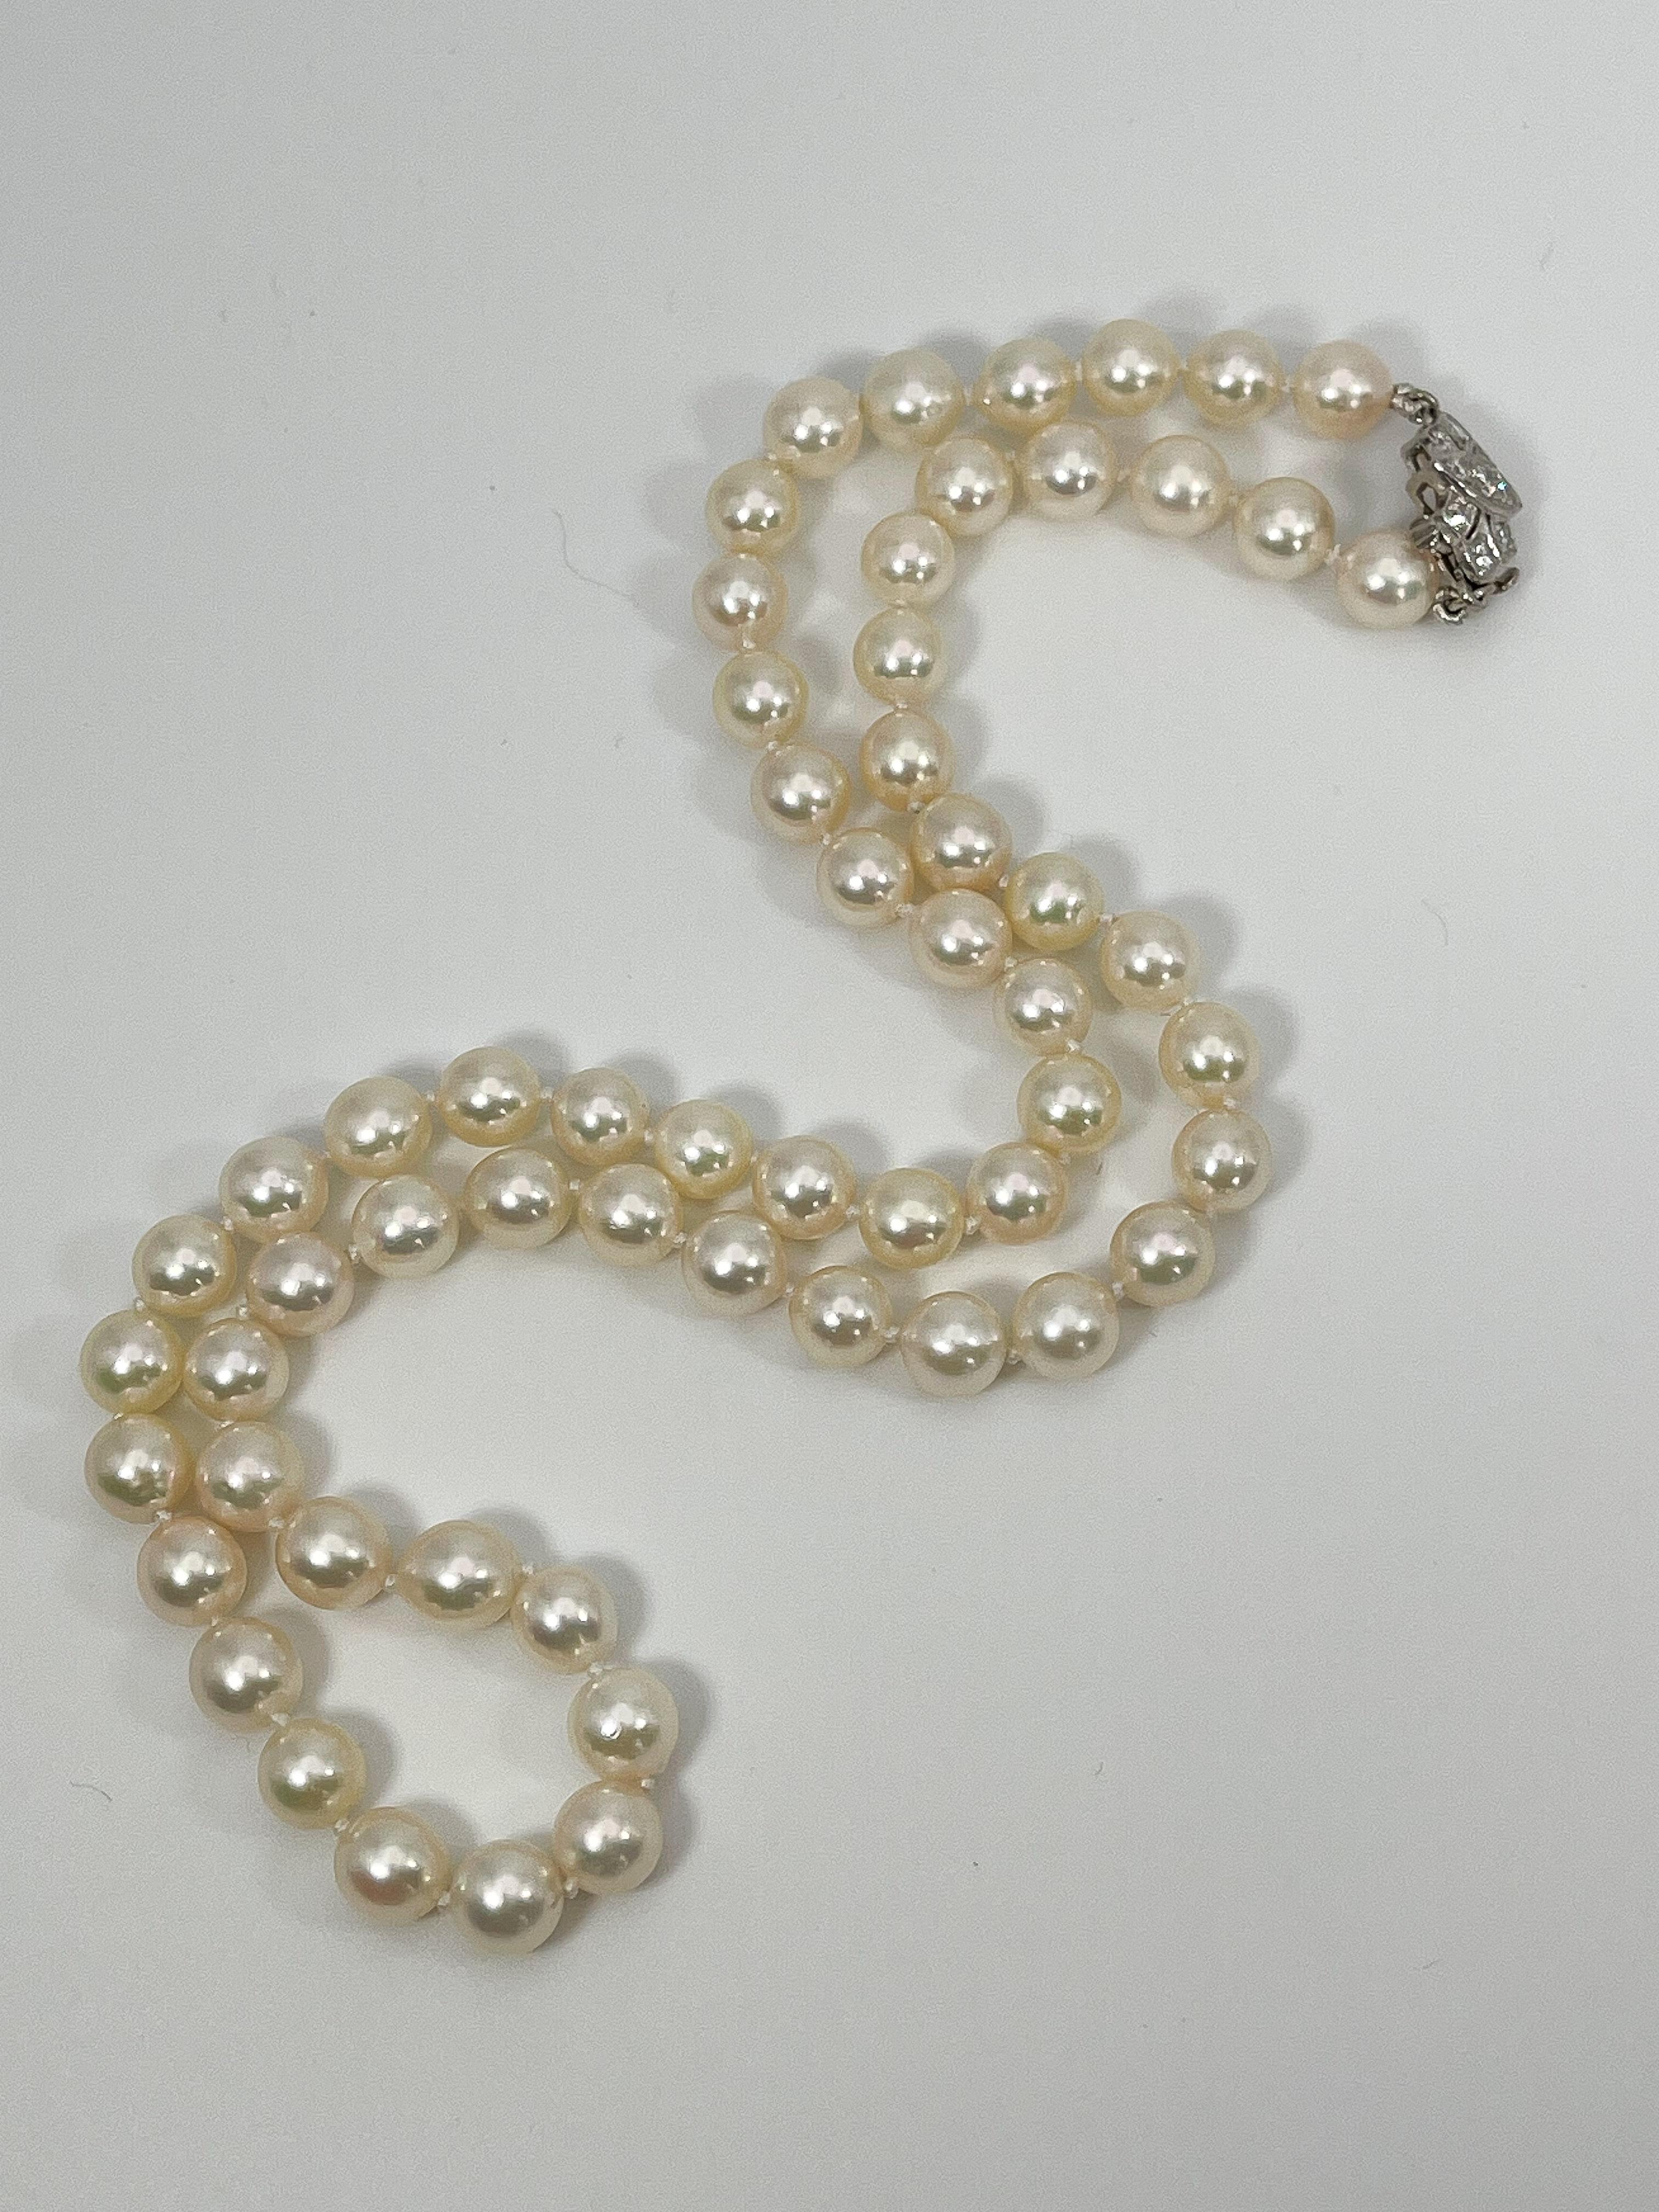 White Pearl Strand Necklace with Platinum Diamond Pearl Clasp In Excellent Condition For Sale In Stuart, FL